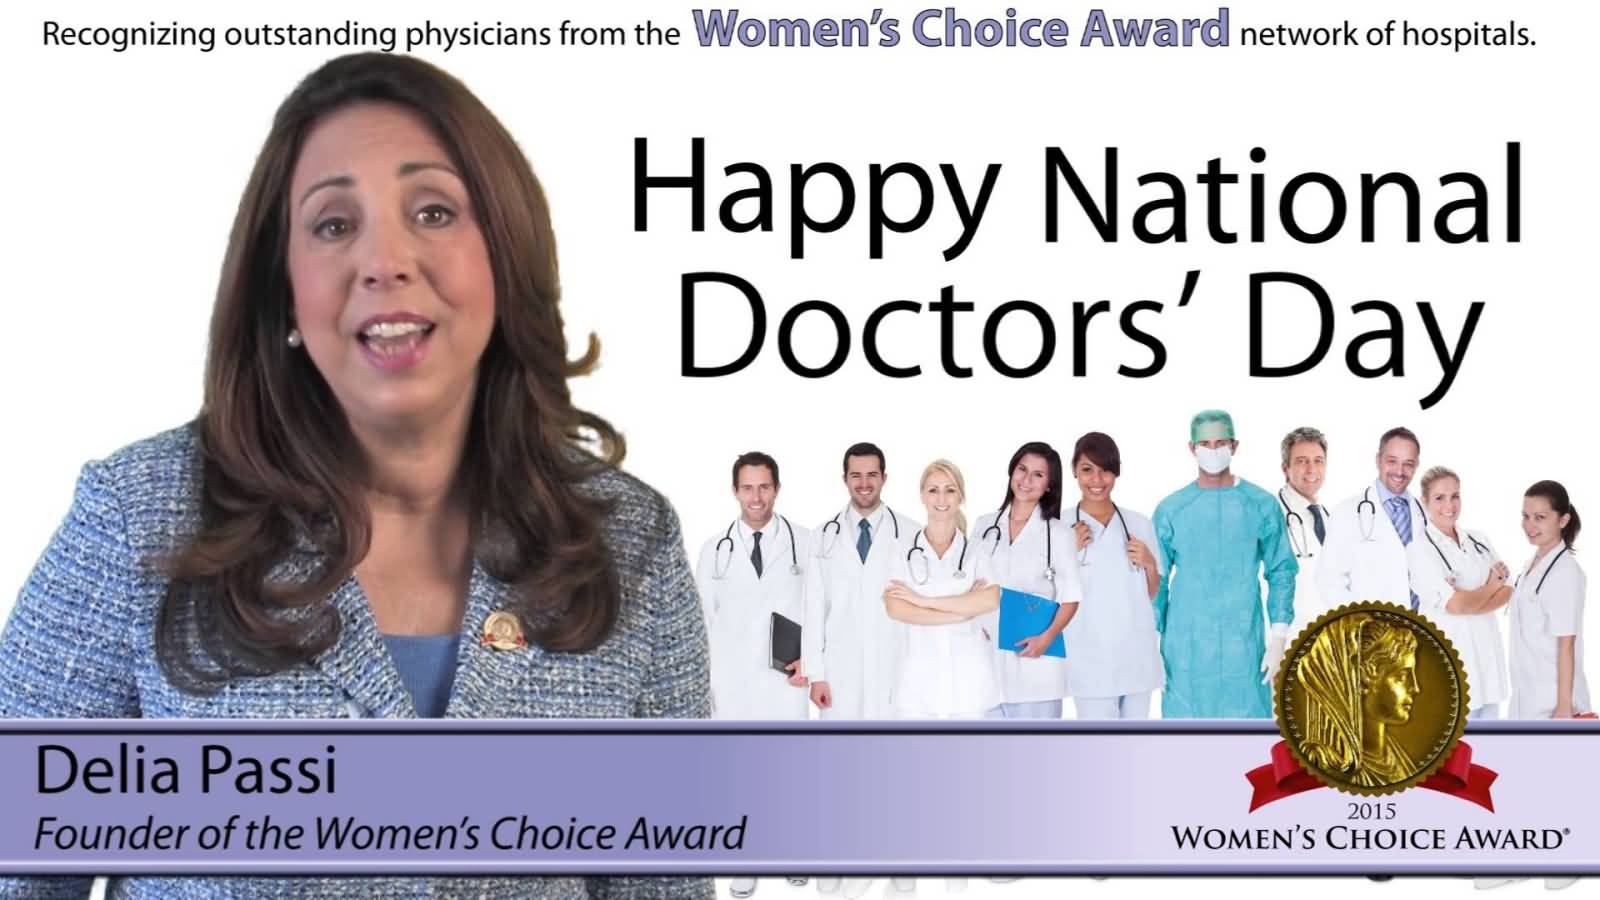 Happy National Doctor's Day